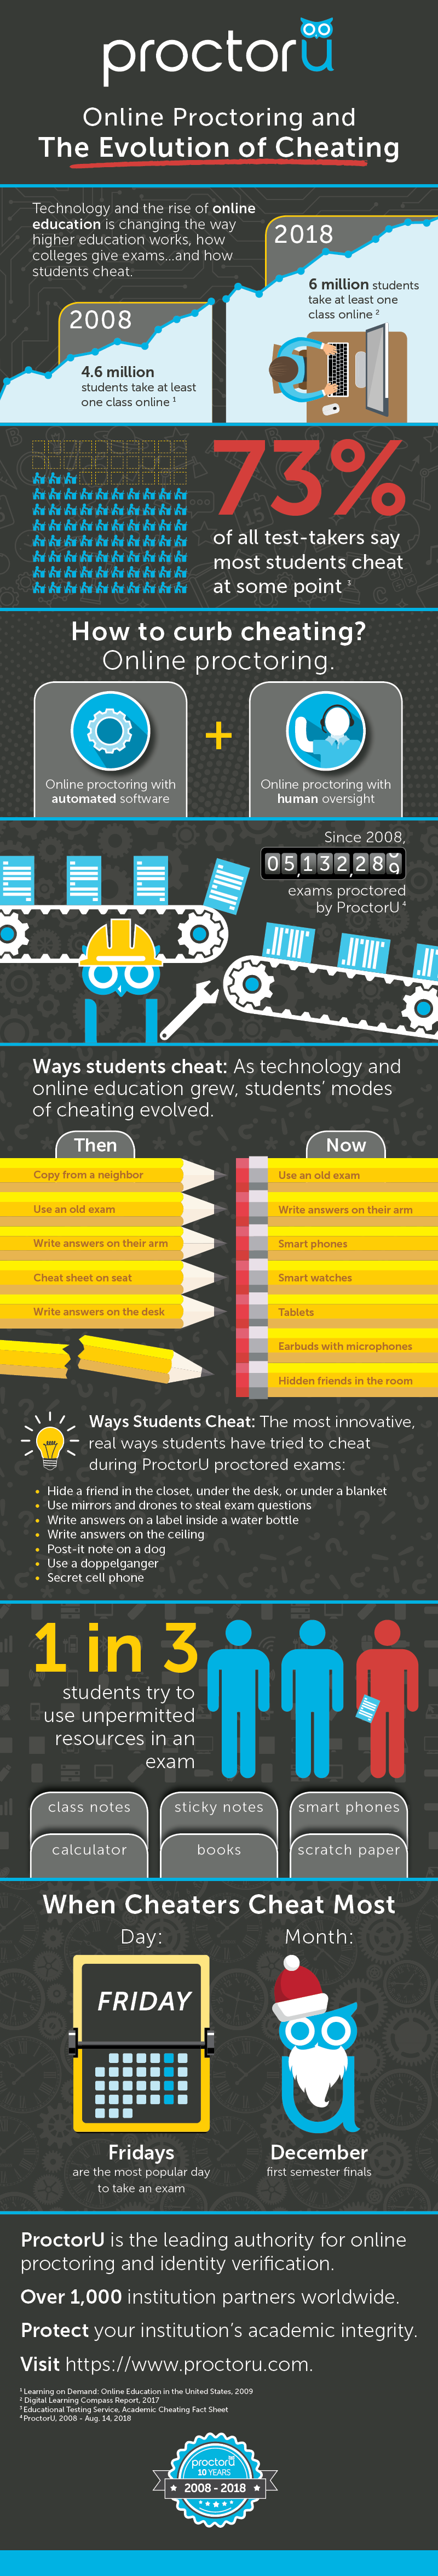 Evolution of Cheating Infographic